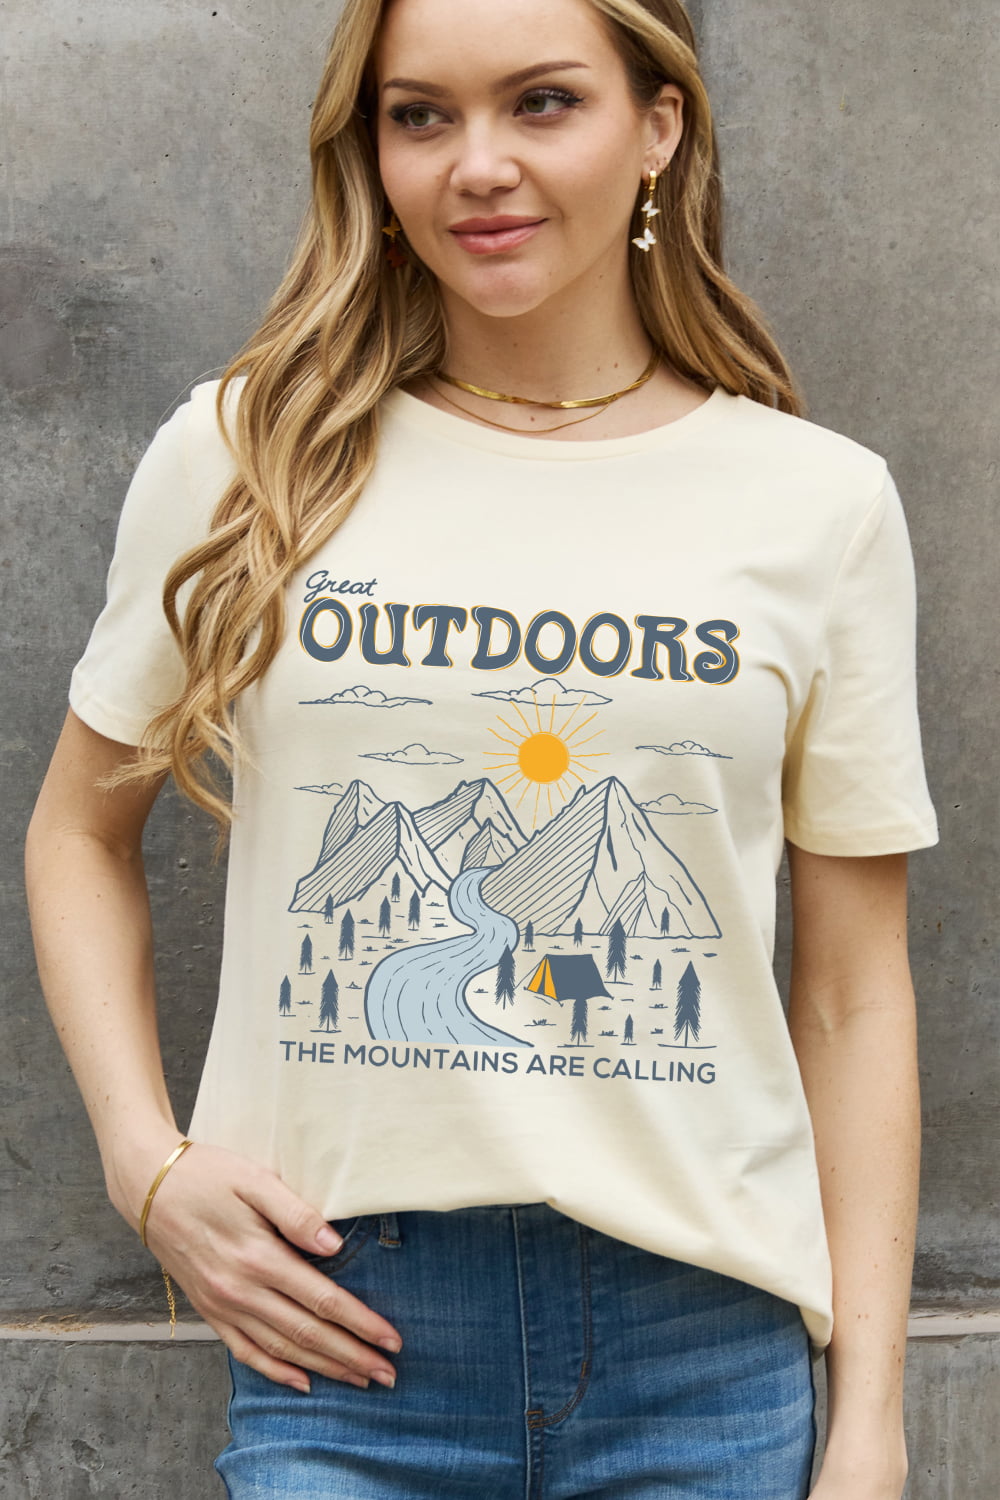 Simply Love Full Size GREAT OUTDOORS Graphic Cotton Tee